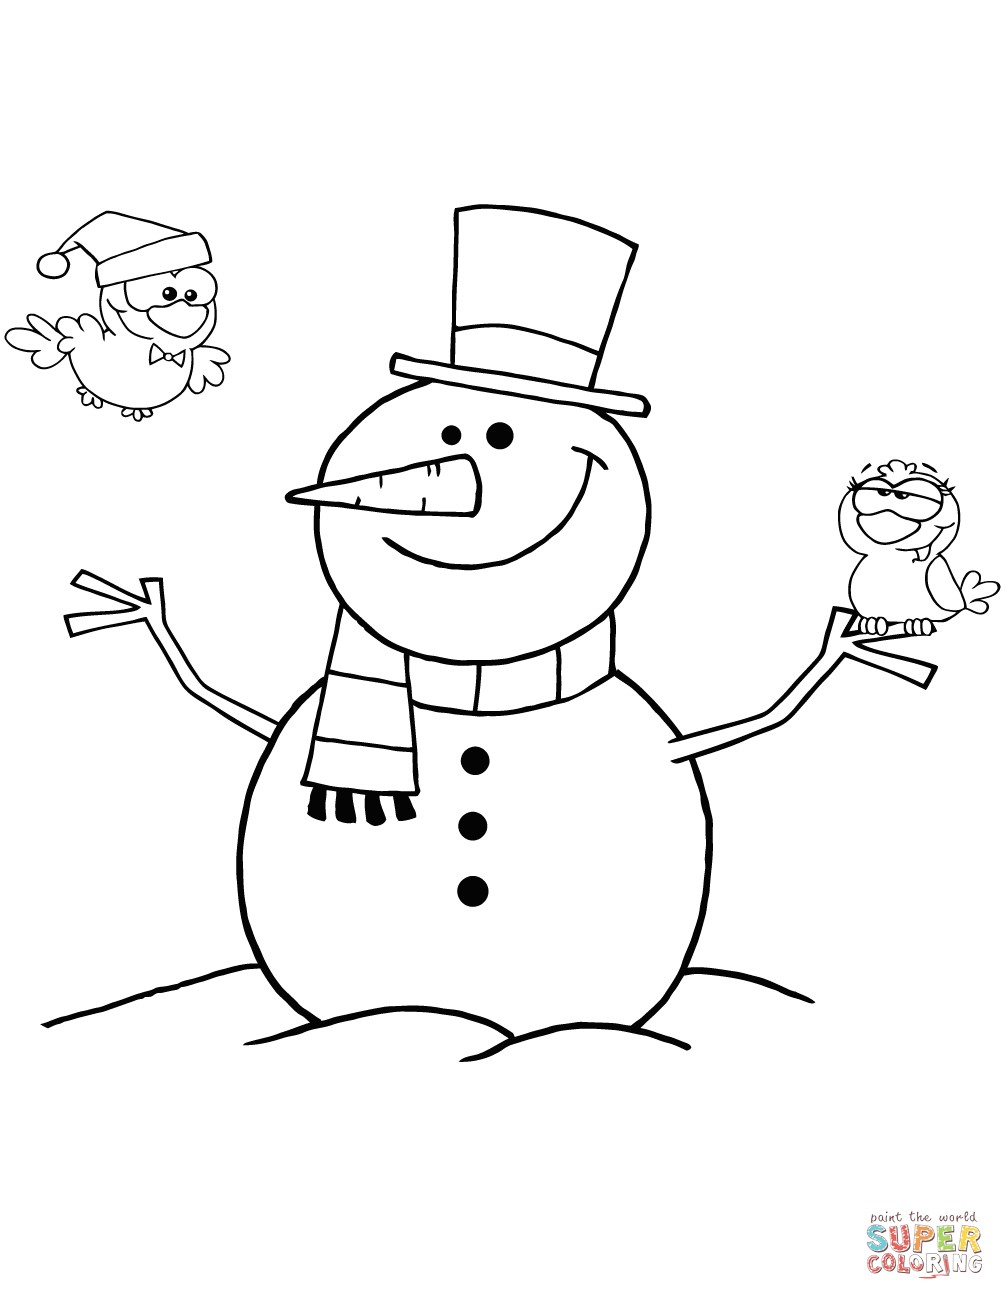 Coloring Pages Of Snowmen Friendly Snowman With A Cute Birds Coloring Page For Snowman